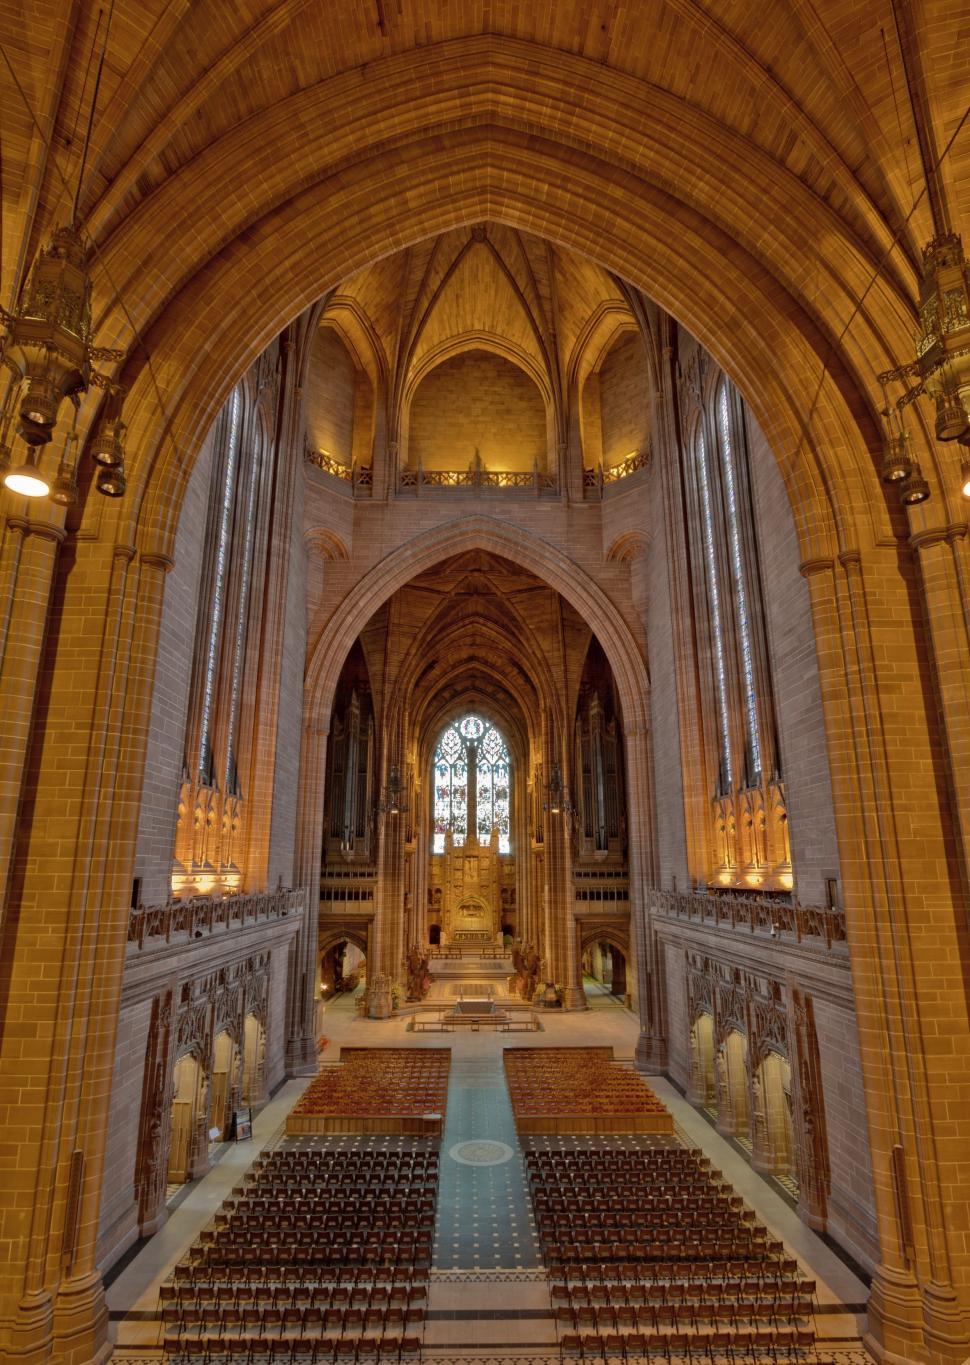 Free Image of Grand Cathedral Interior With Rows of Pews 